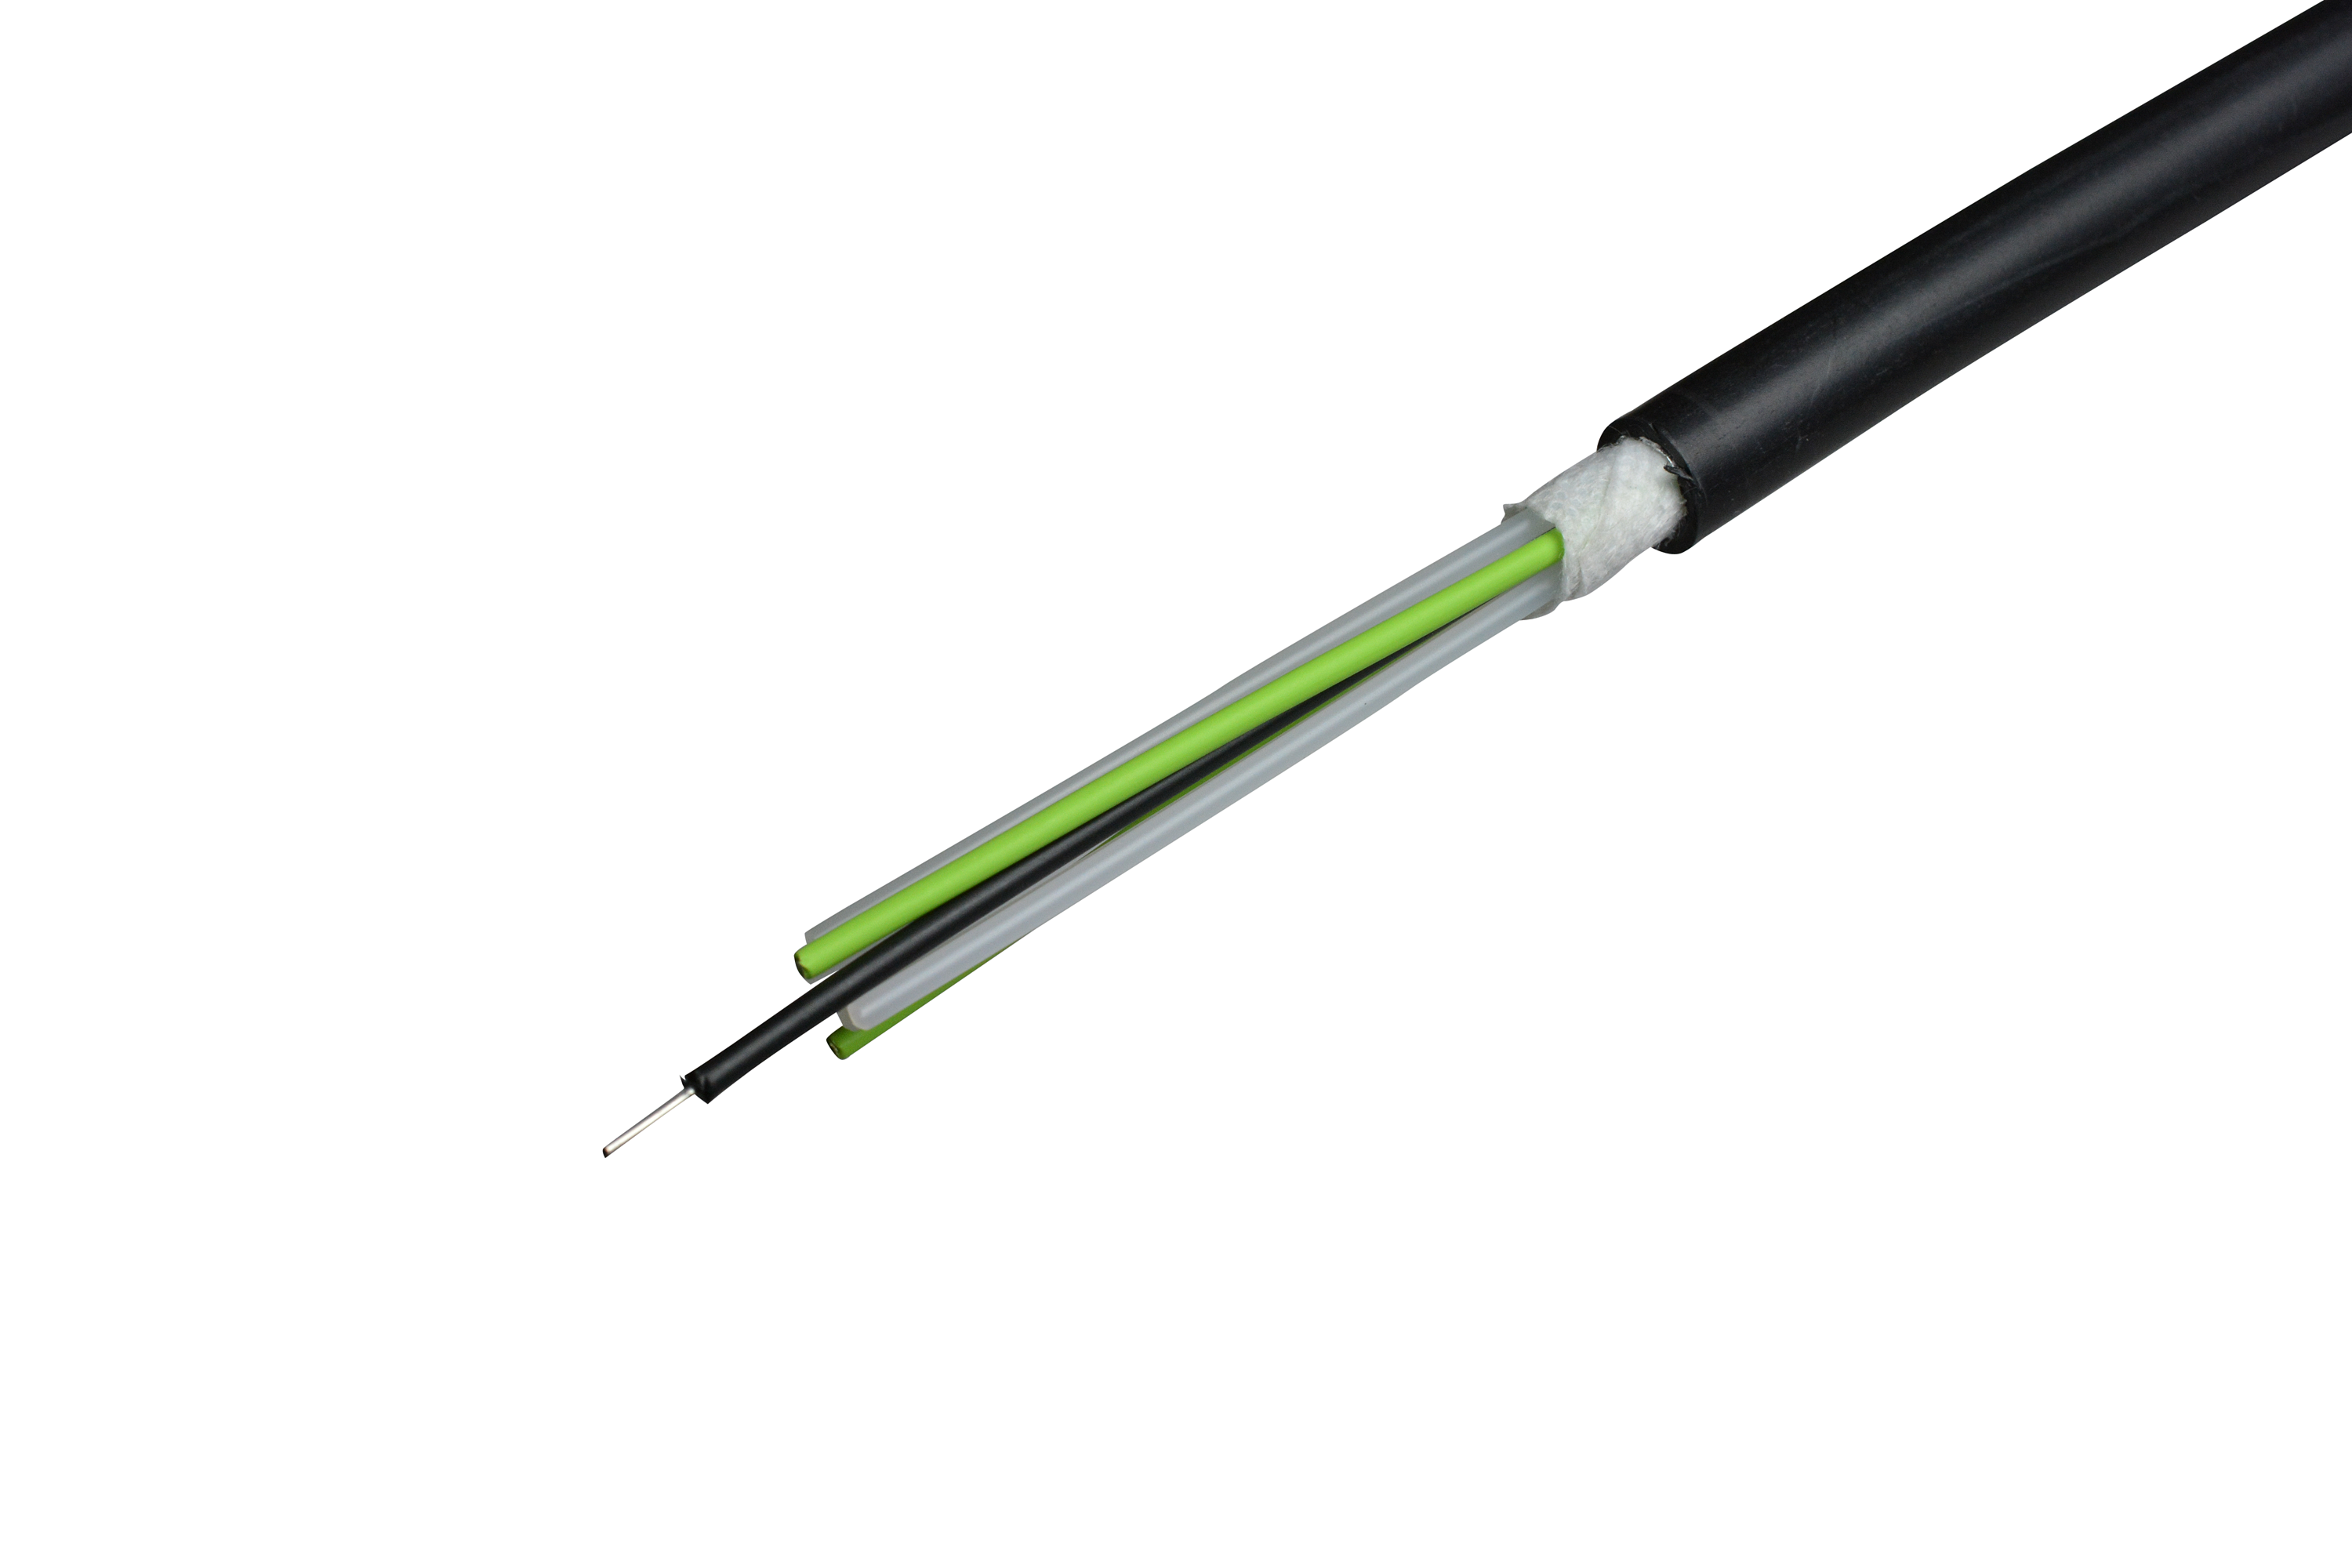 6cores,OM4,Unitized Round Type Fiber Optic Cable for Indoor and OutdoorUse.